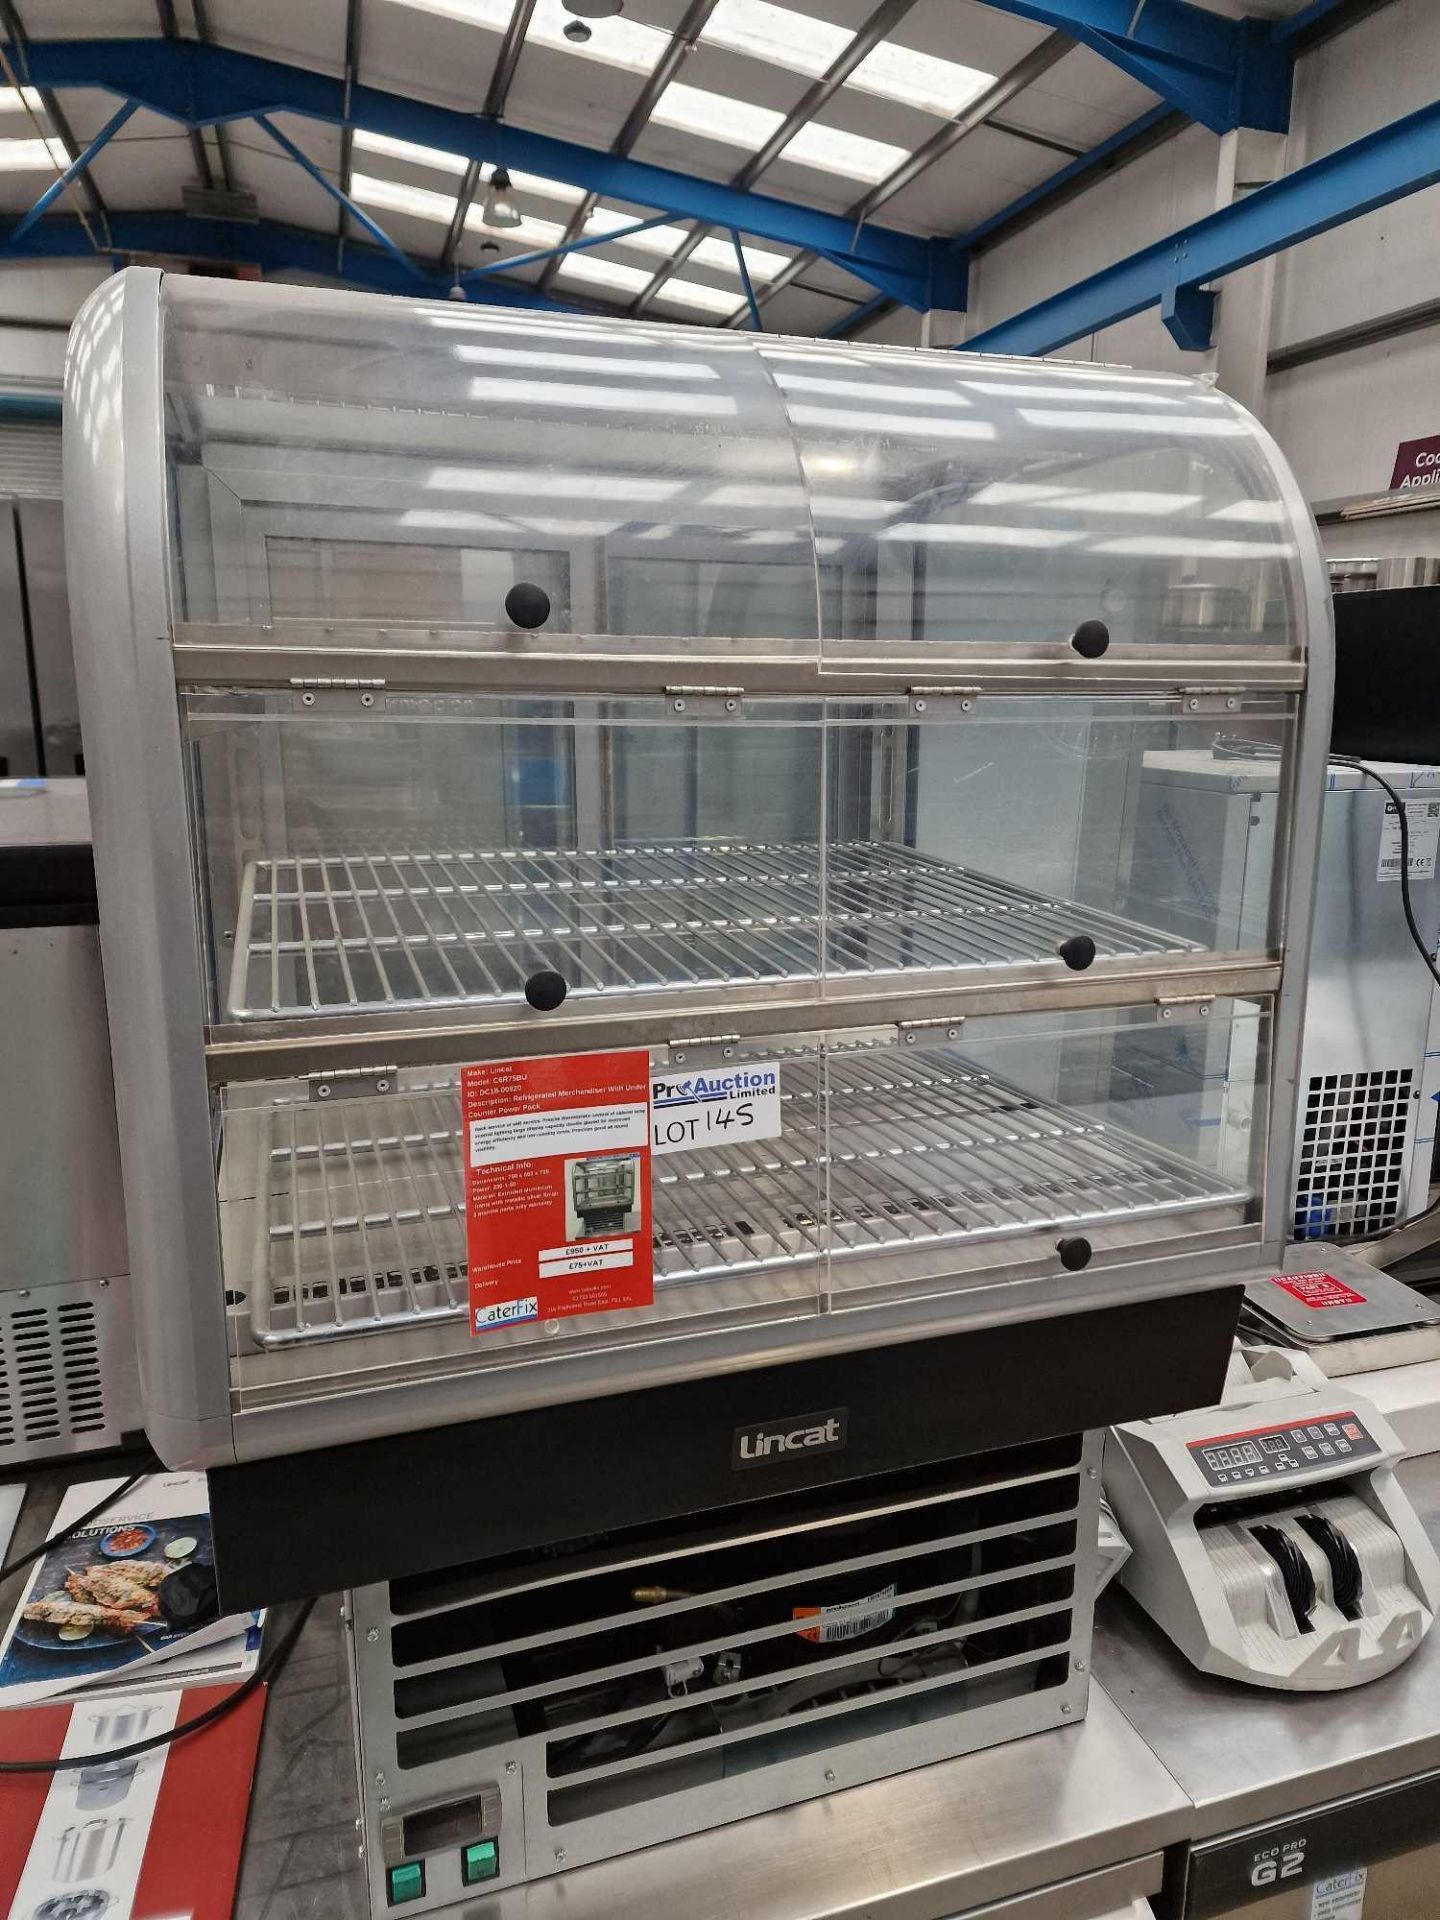 Lincat Refrigerated Merchandiser With Under Counter Power Pack Back service or self service. Precise